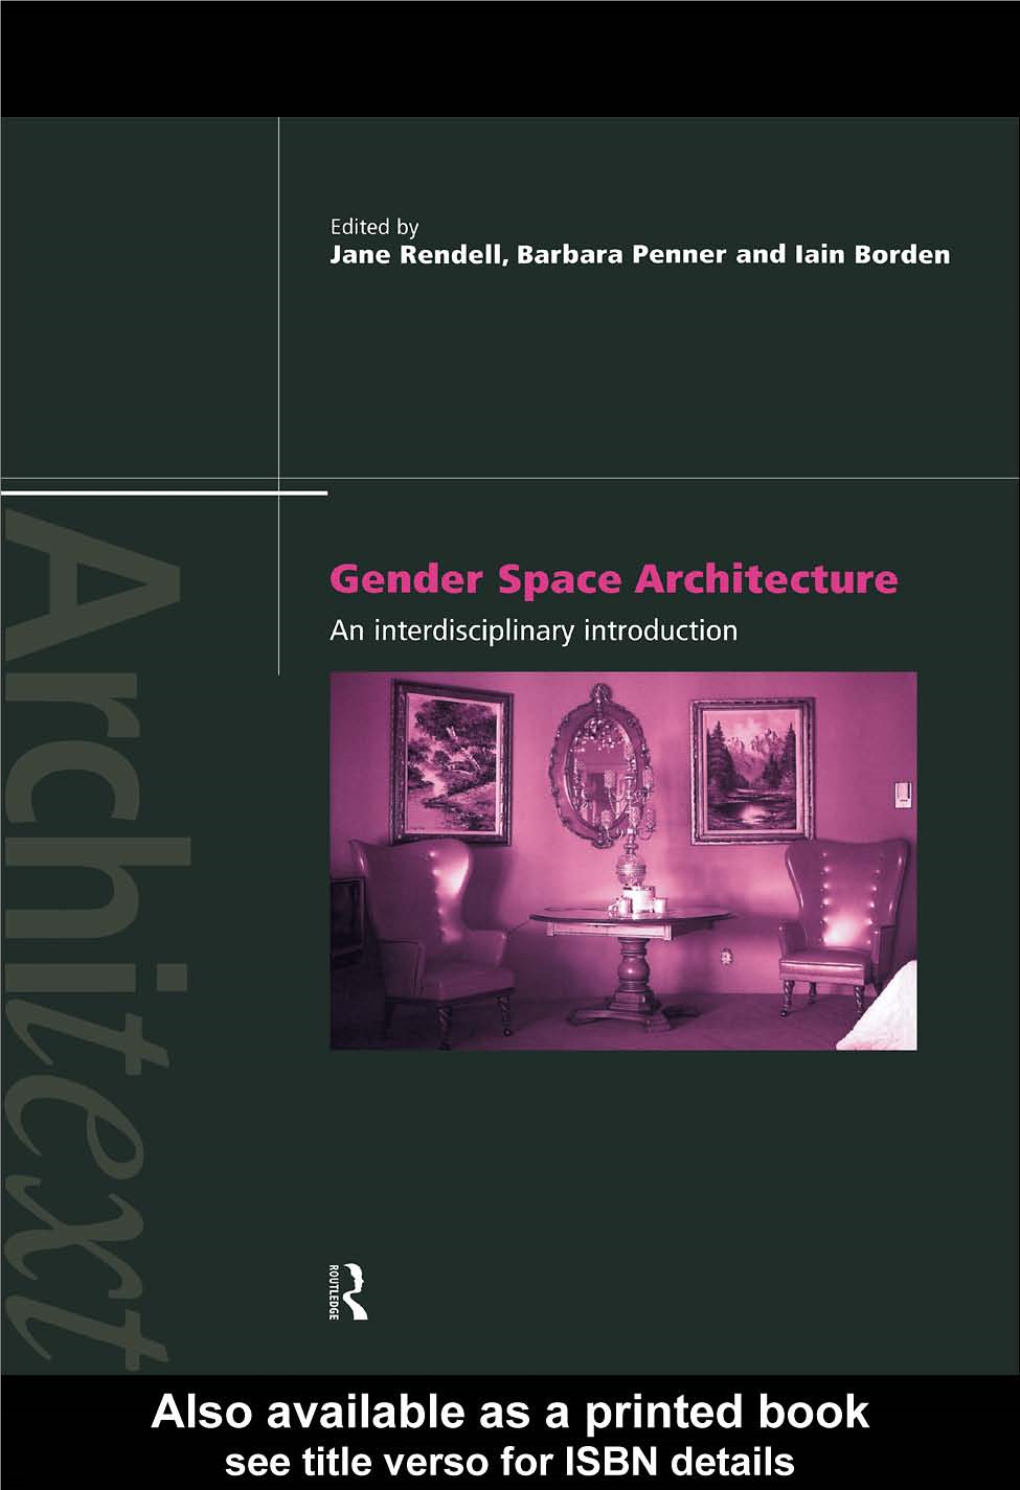 Gender Space Architecture: an Interdisciplinary Introduction/Edited by Jane Rendell, Barbara Penner, Iain Borden